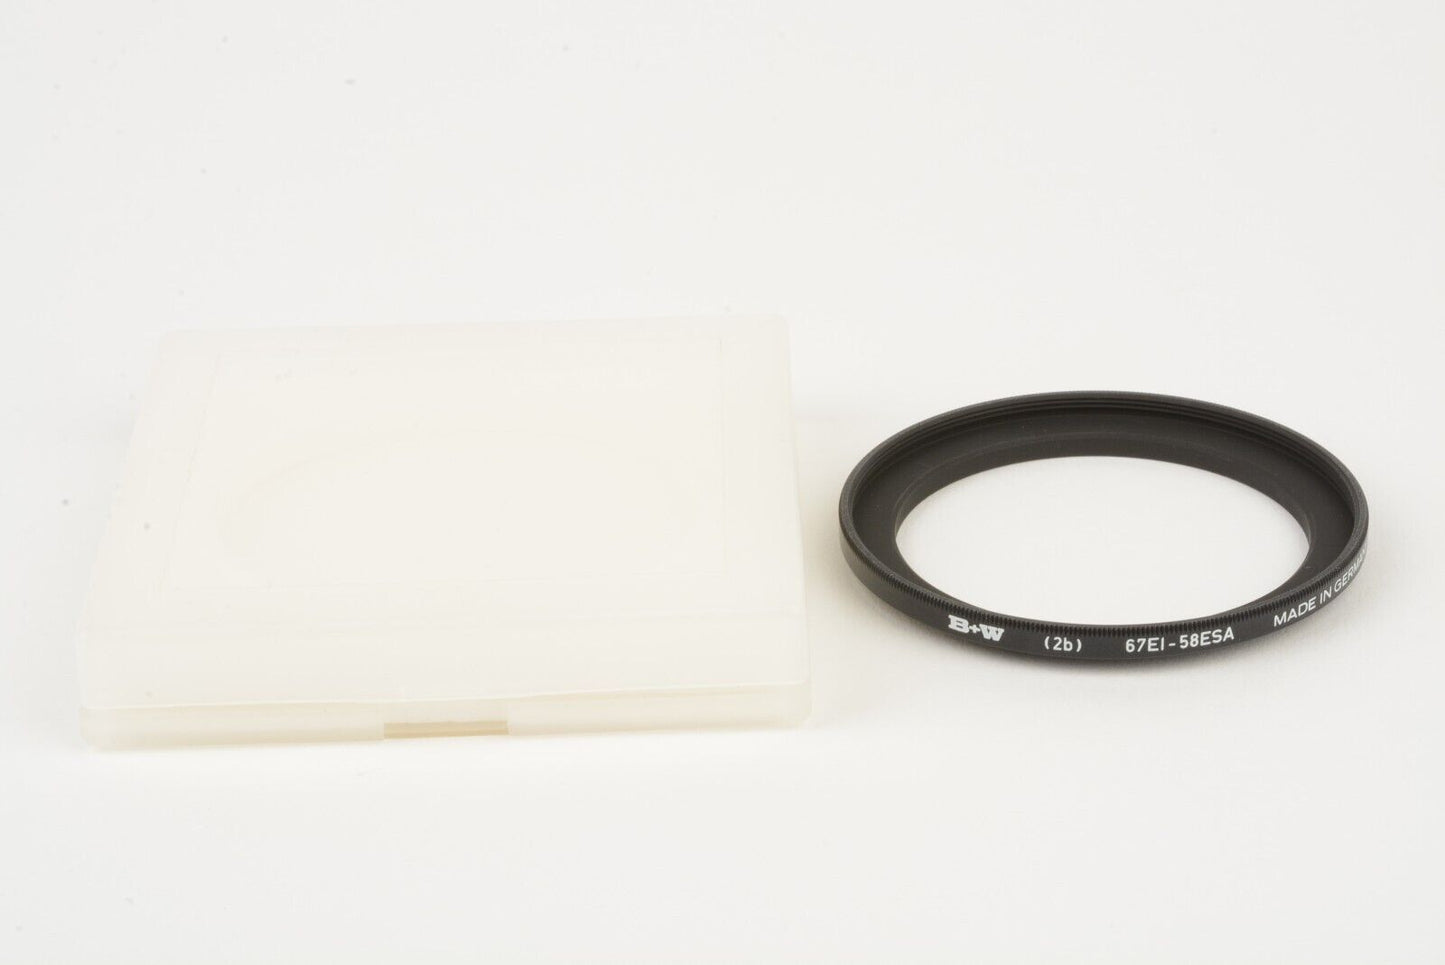 MINT B+W STEP-UP ADAPTER RING  52mm TO 58mm THREAD #65-069459 IN CASE